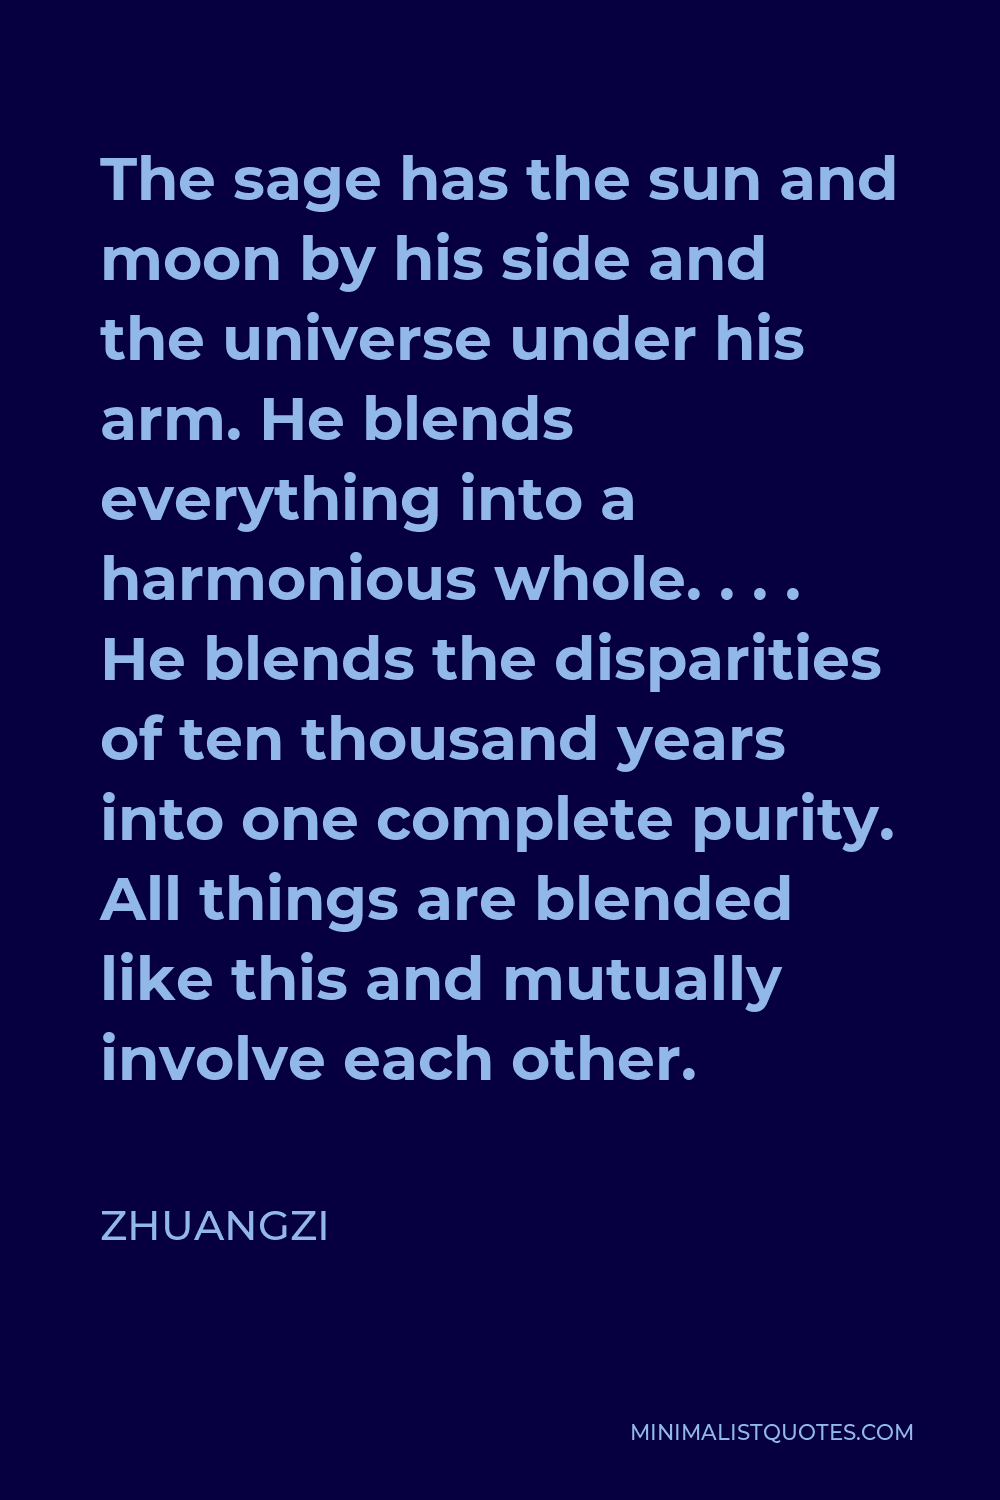 Zhuangzi Quote - The sage has the sun and moon by his side and the universe under his arm. He blends everything into a harmonious whole. . . . He blends the disparities of ten thousand years into one complete purity. All things are blended like this and mutually involve each other.